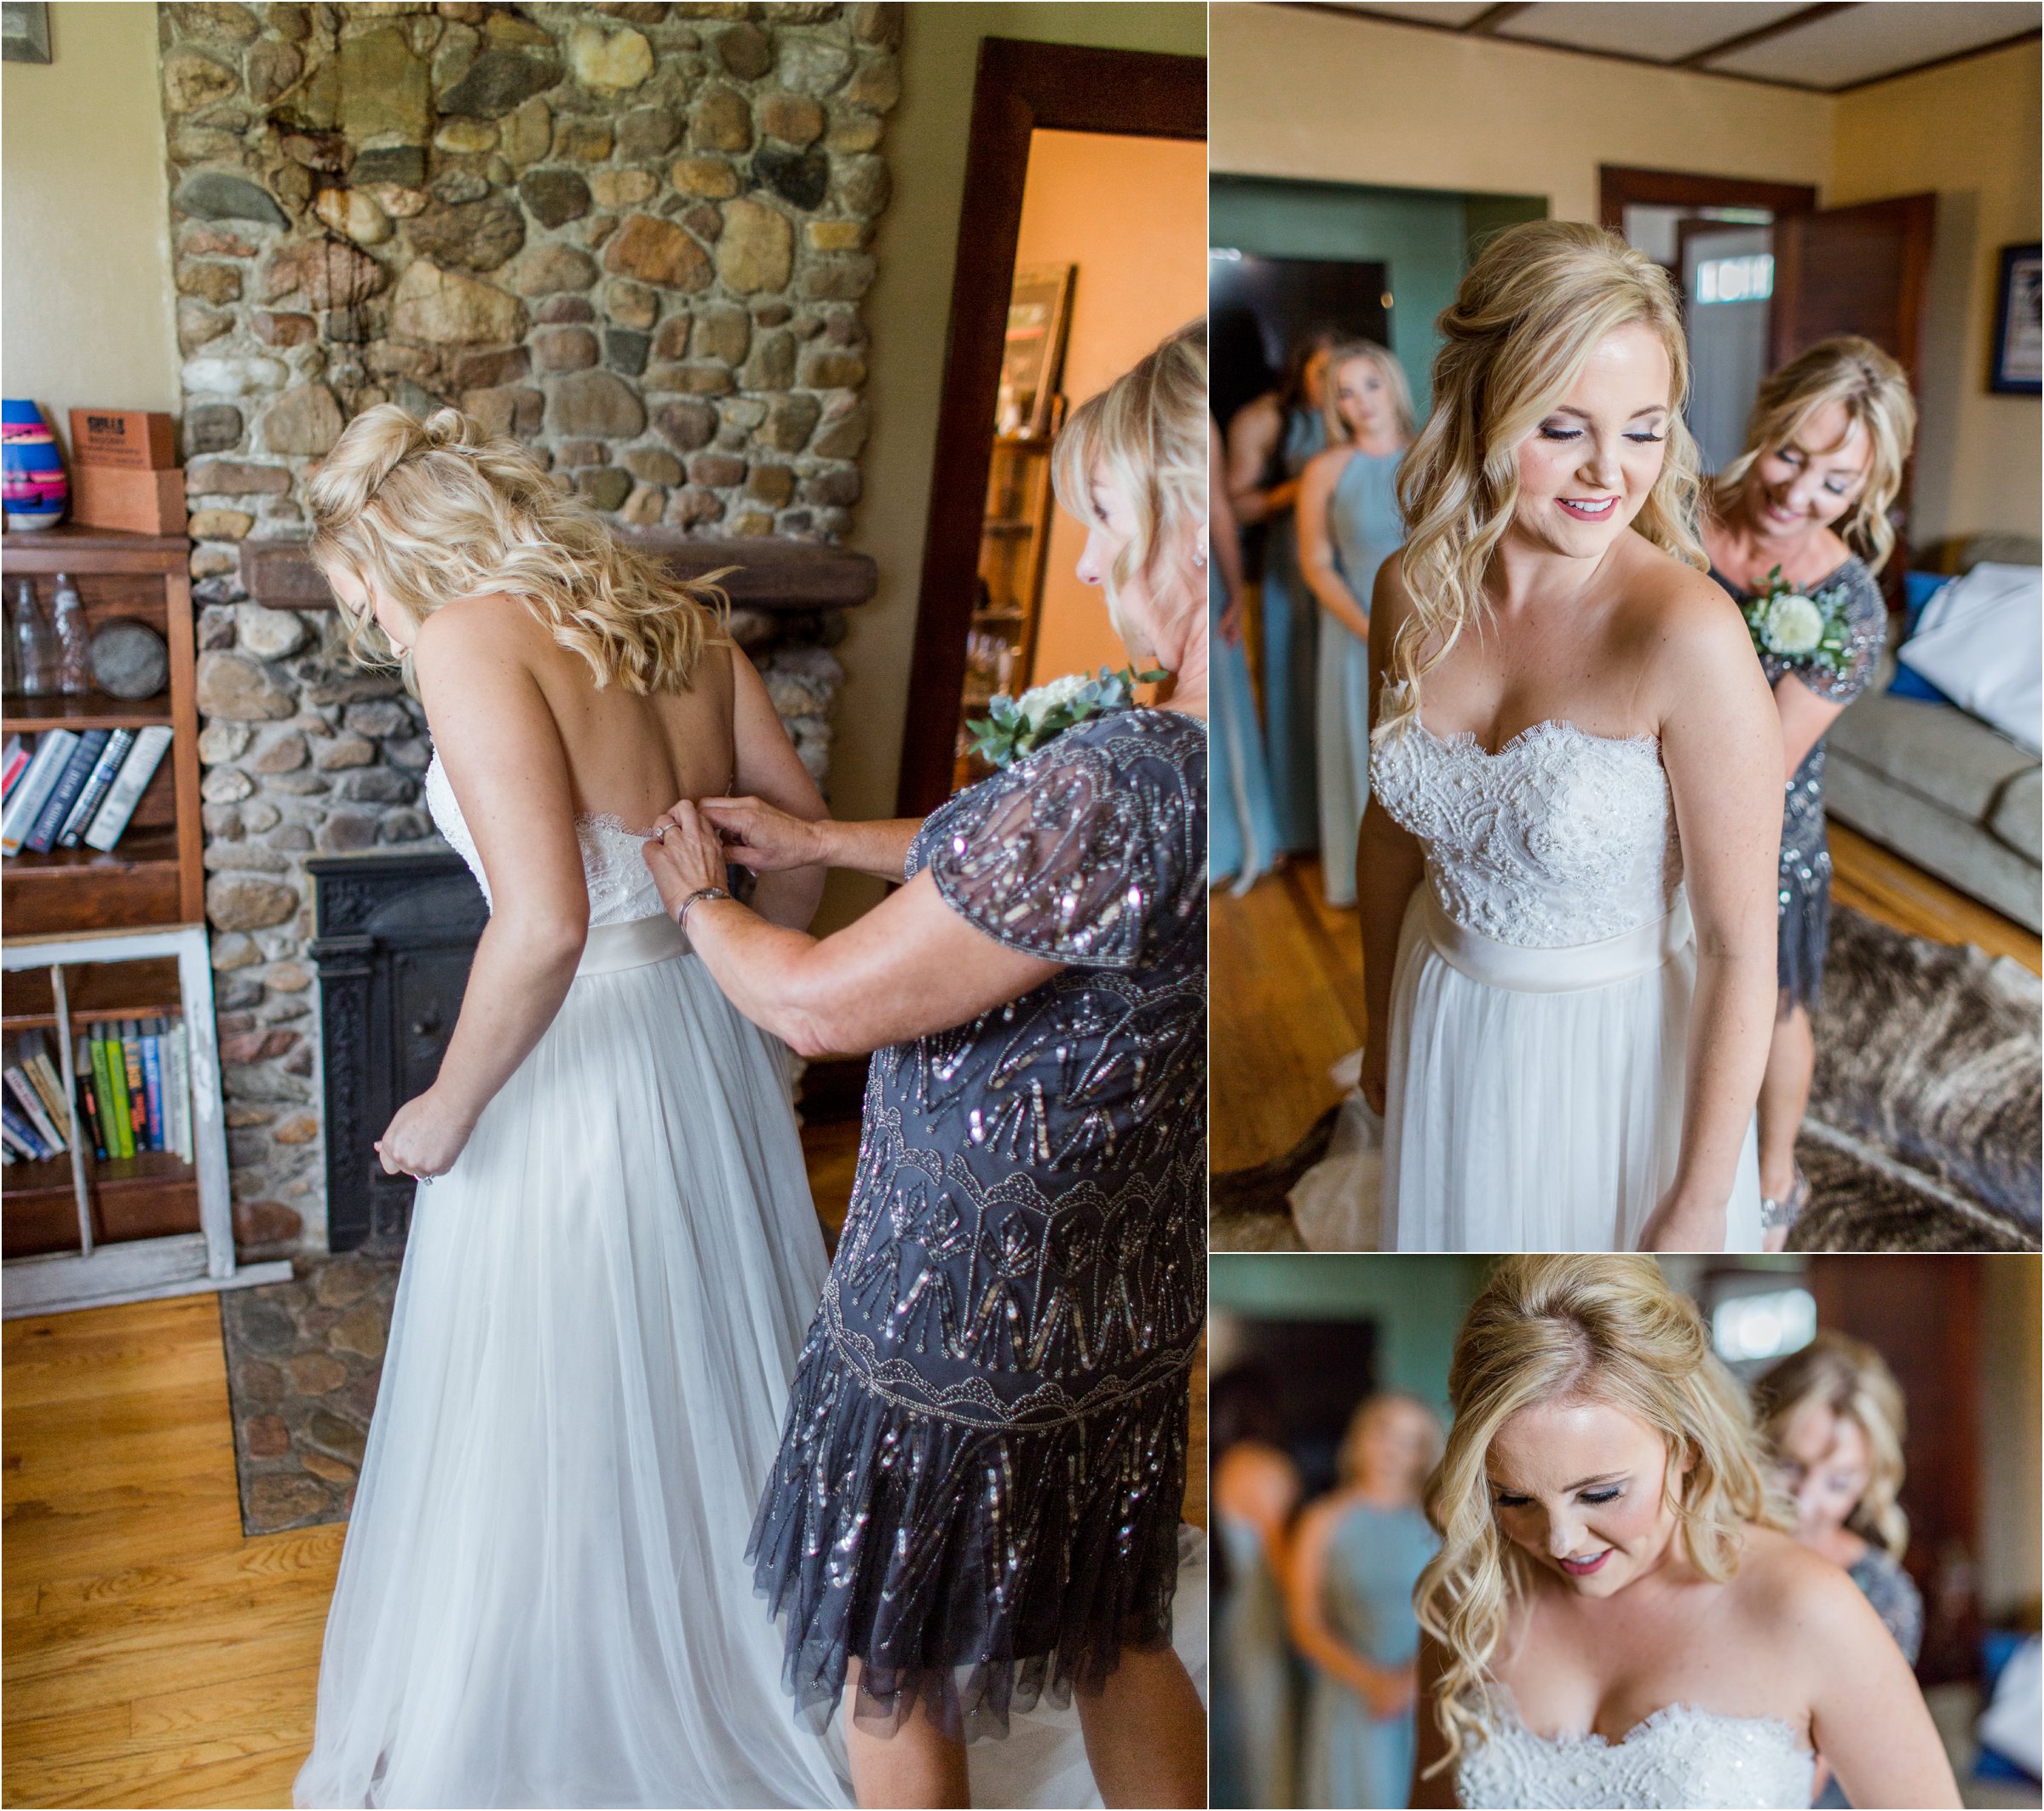 the bride's mom helping her into her dress in her own living room